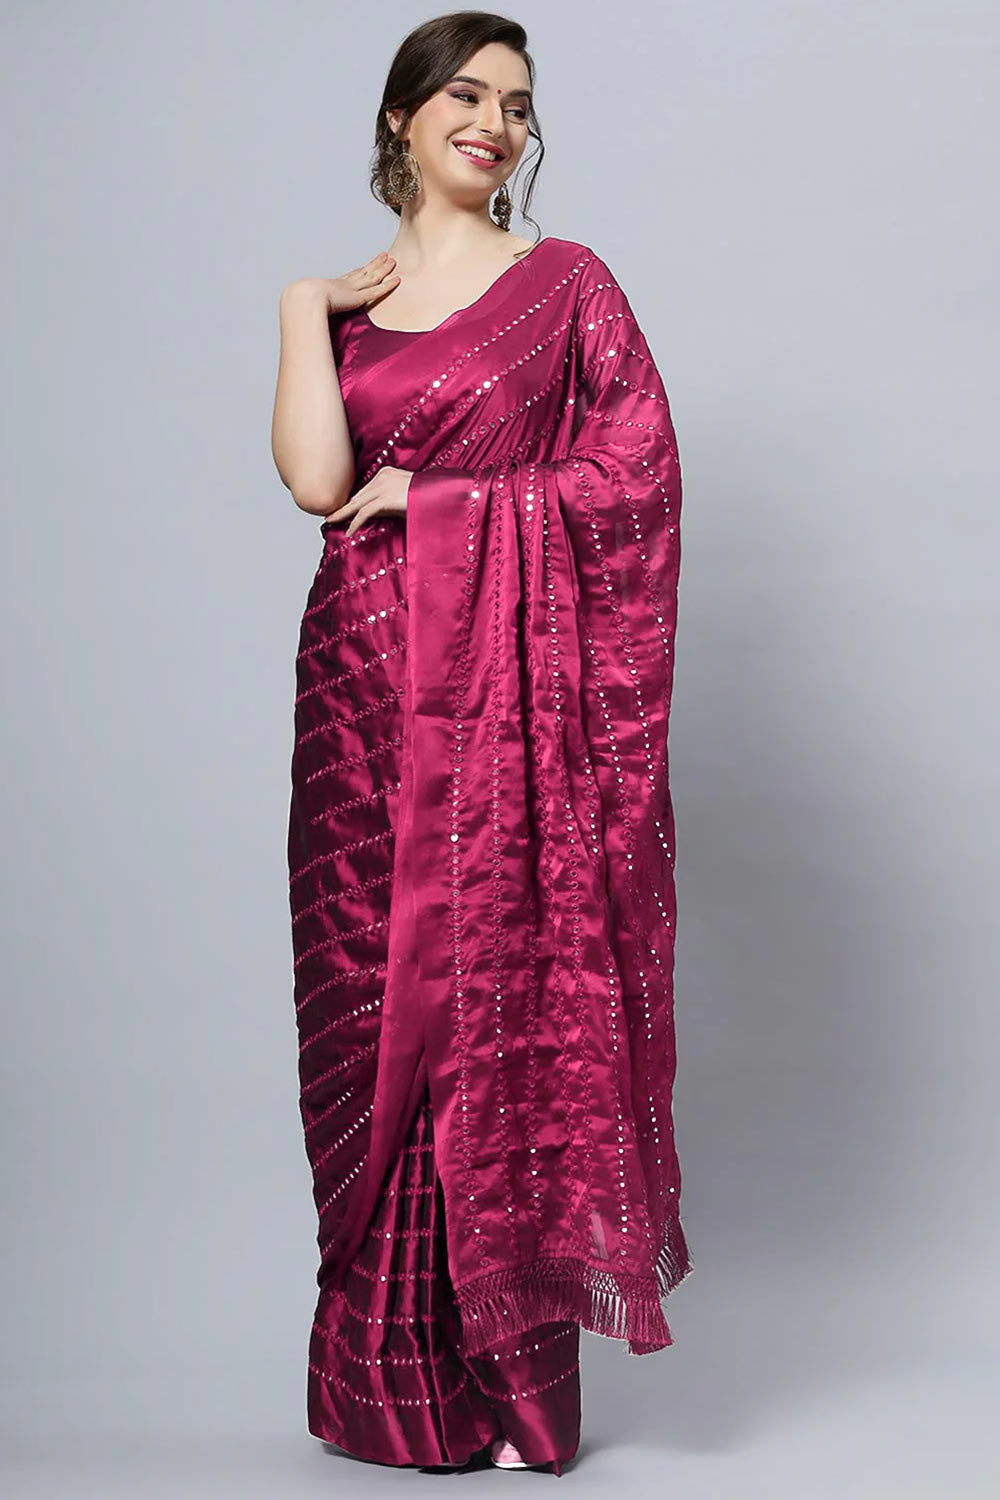 Shop Akila Crepe Silk Wine Mirror Work One Minute Saree at best offer at our  Store - One Minute Saree